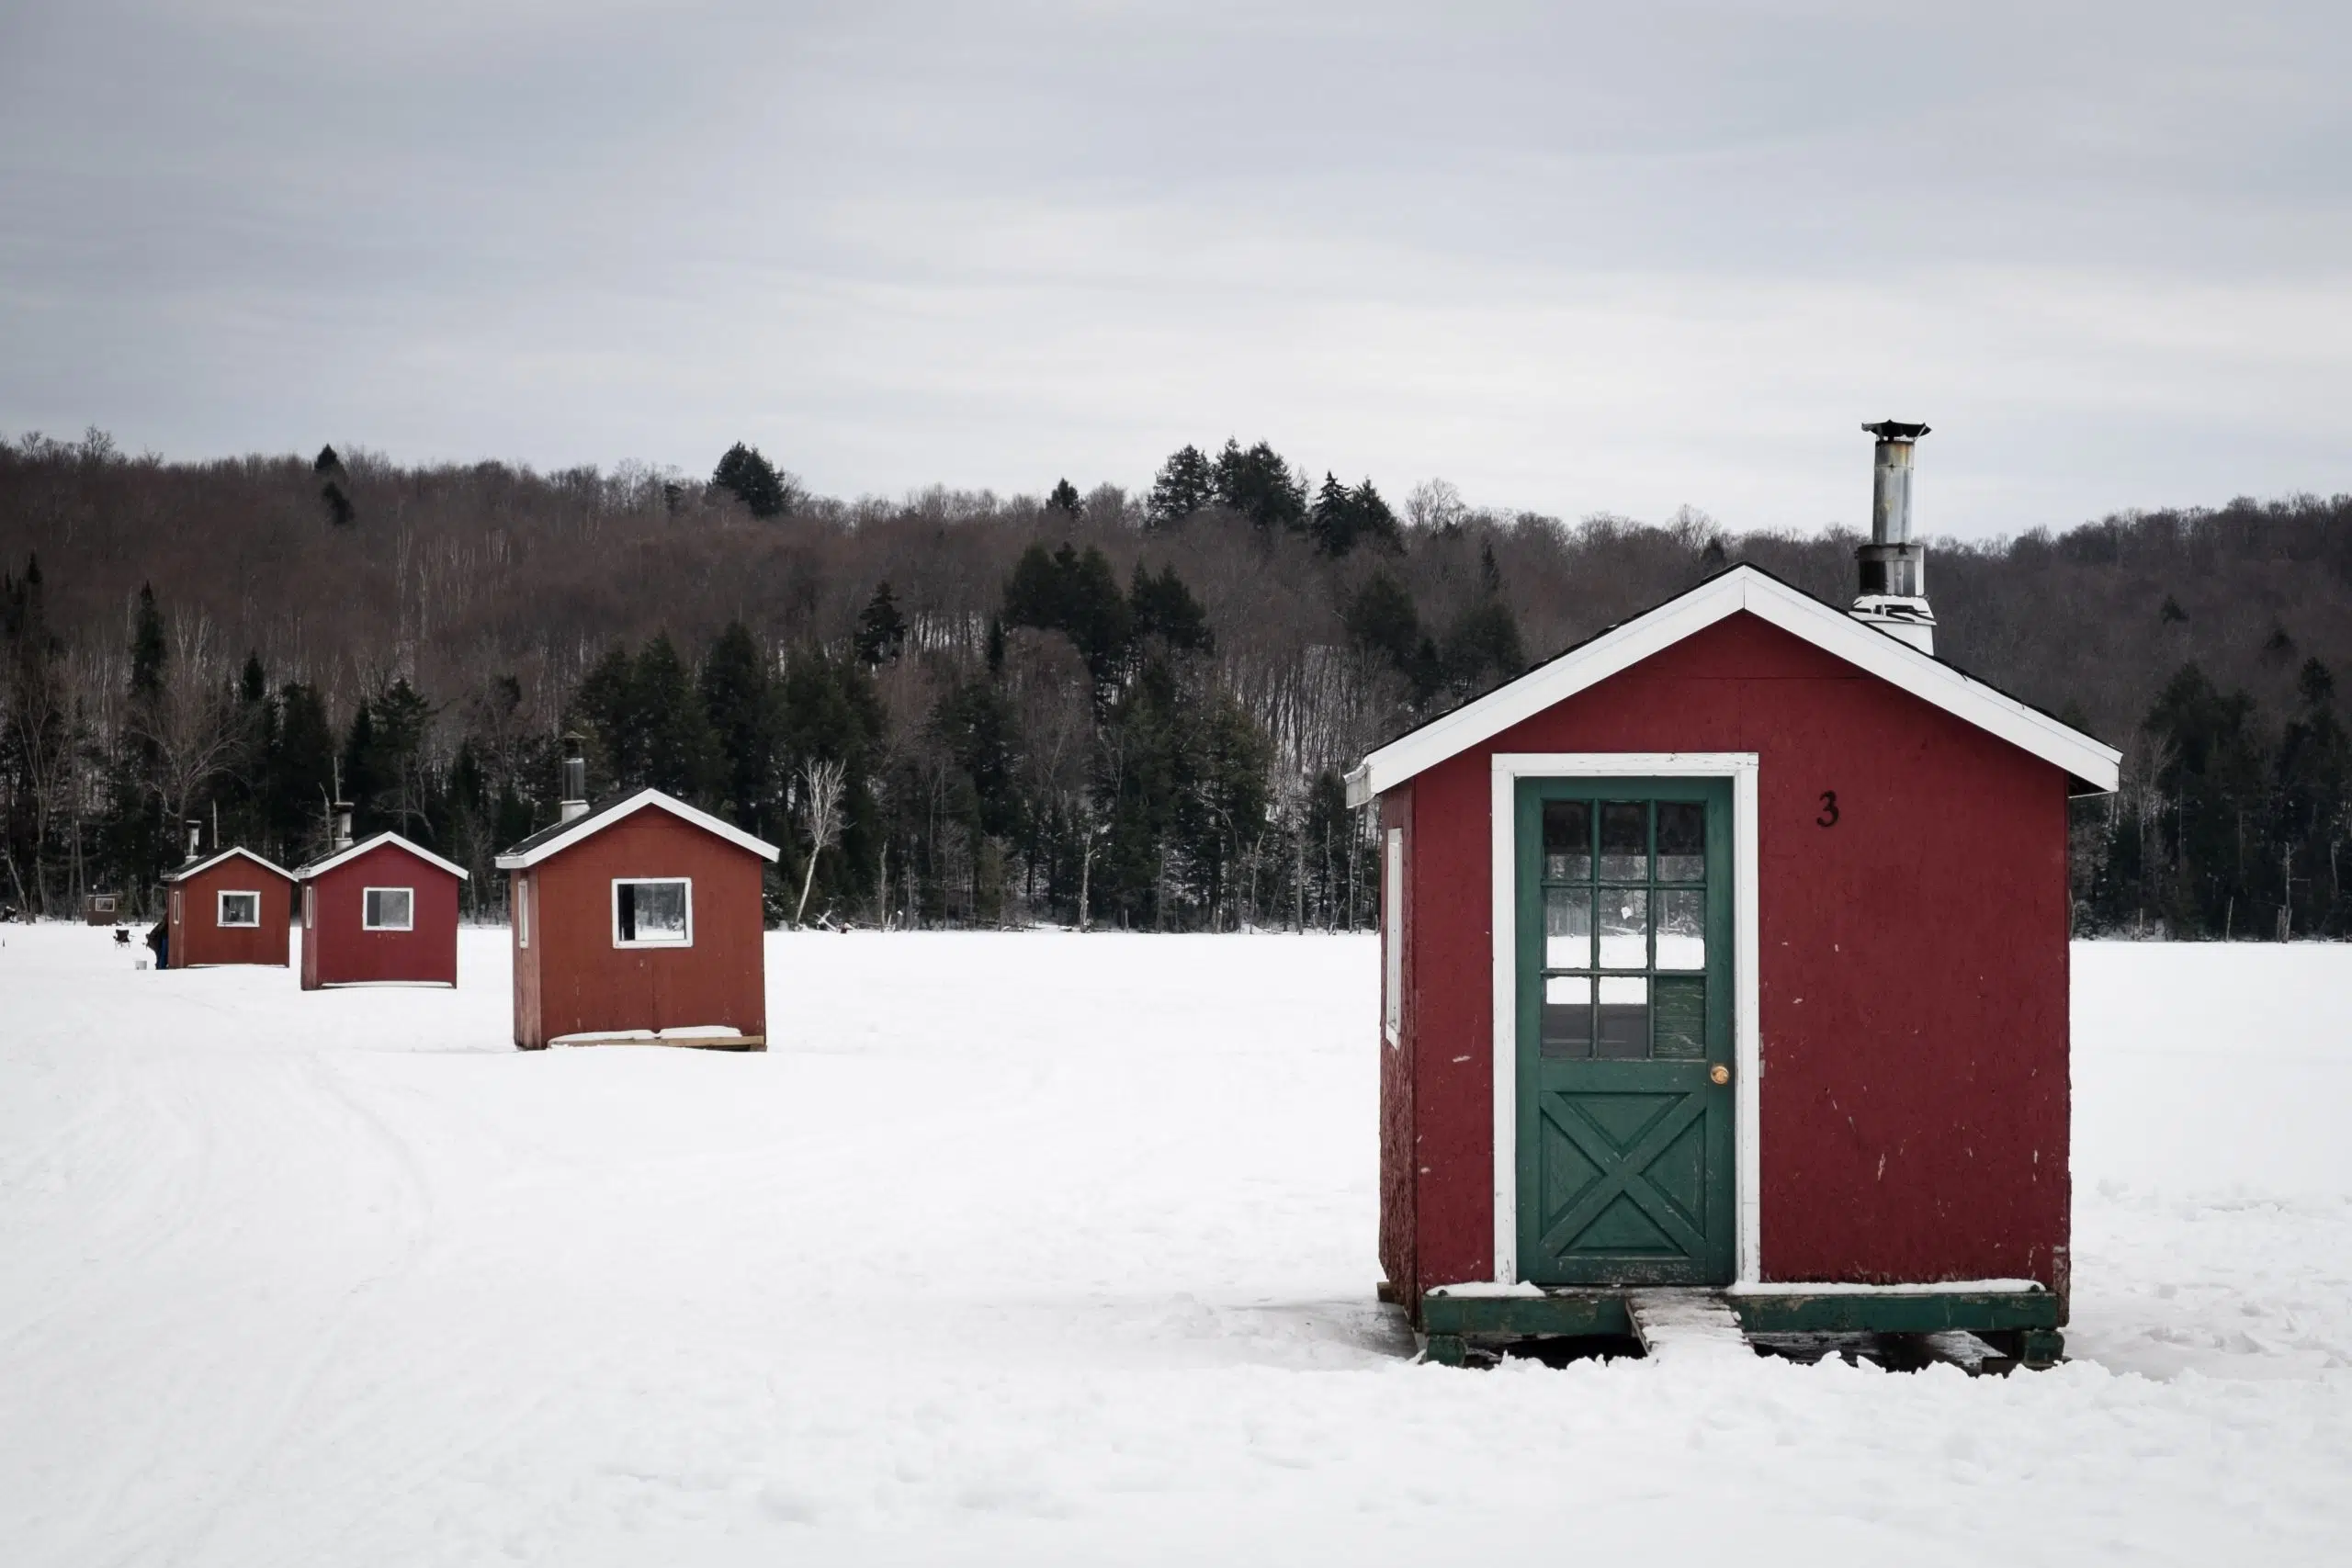 Ice fishing shelters must be removed by Sunday